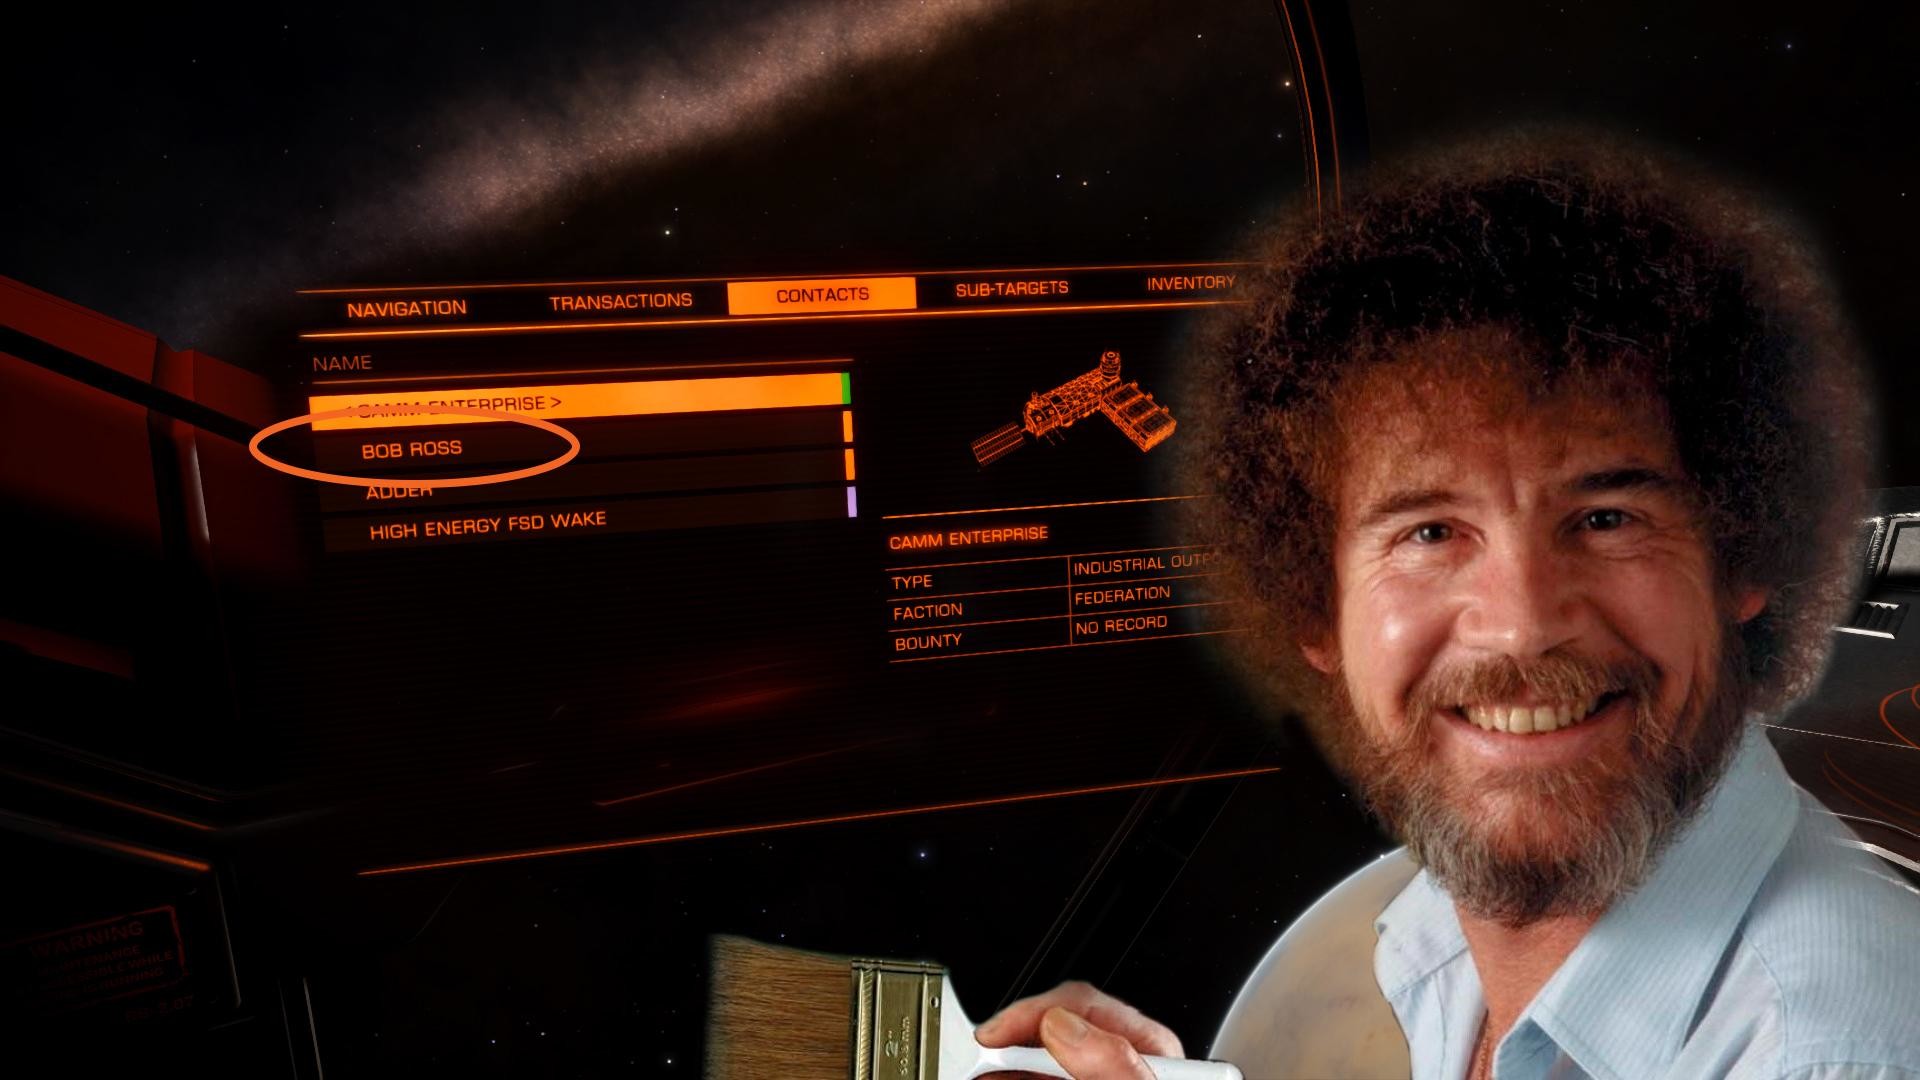 1920x1080 Since the Mods in /r/EliteDangerous clearly hate Bob Ross.